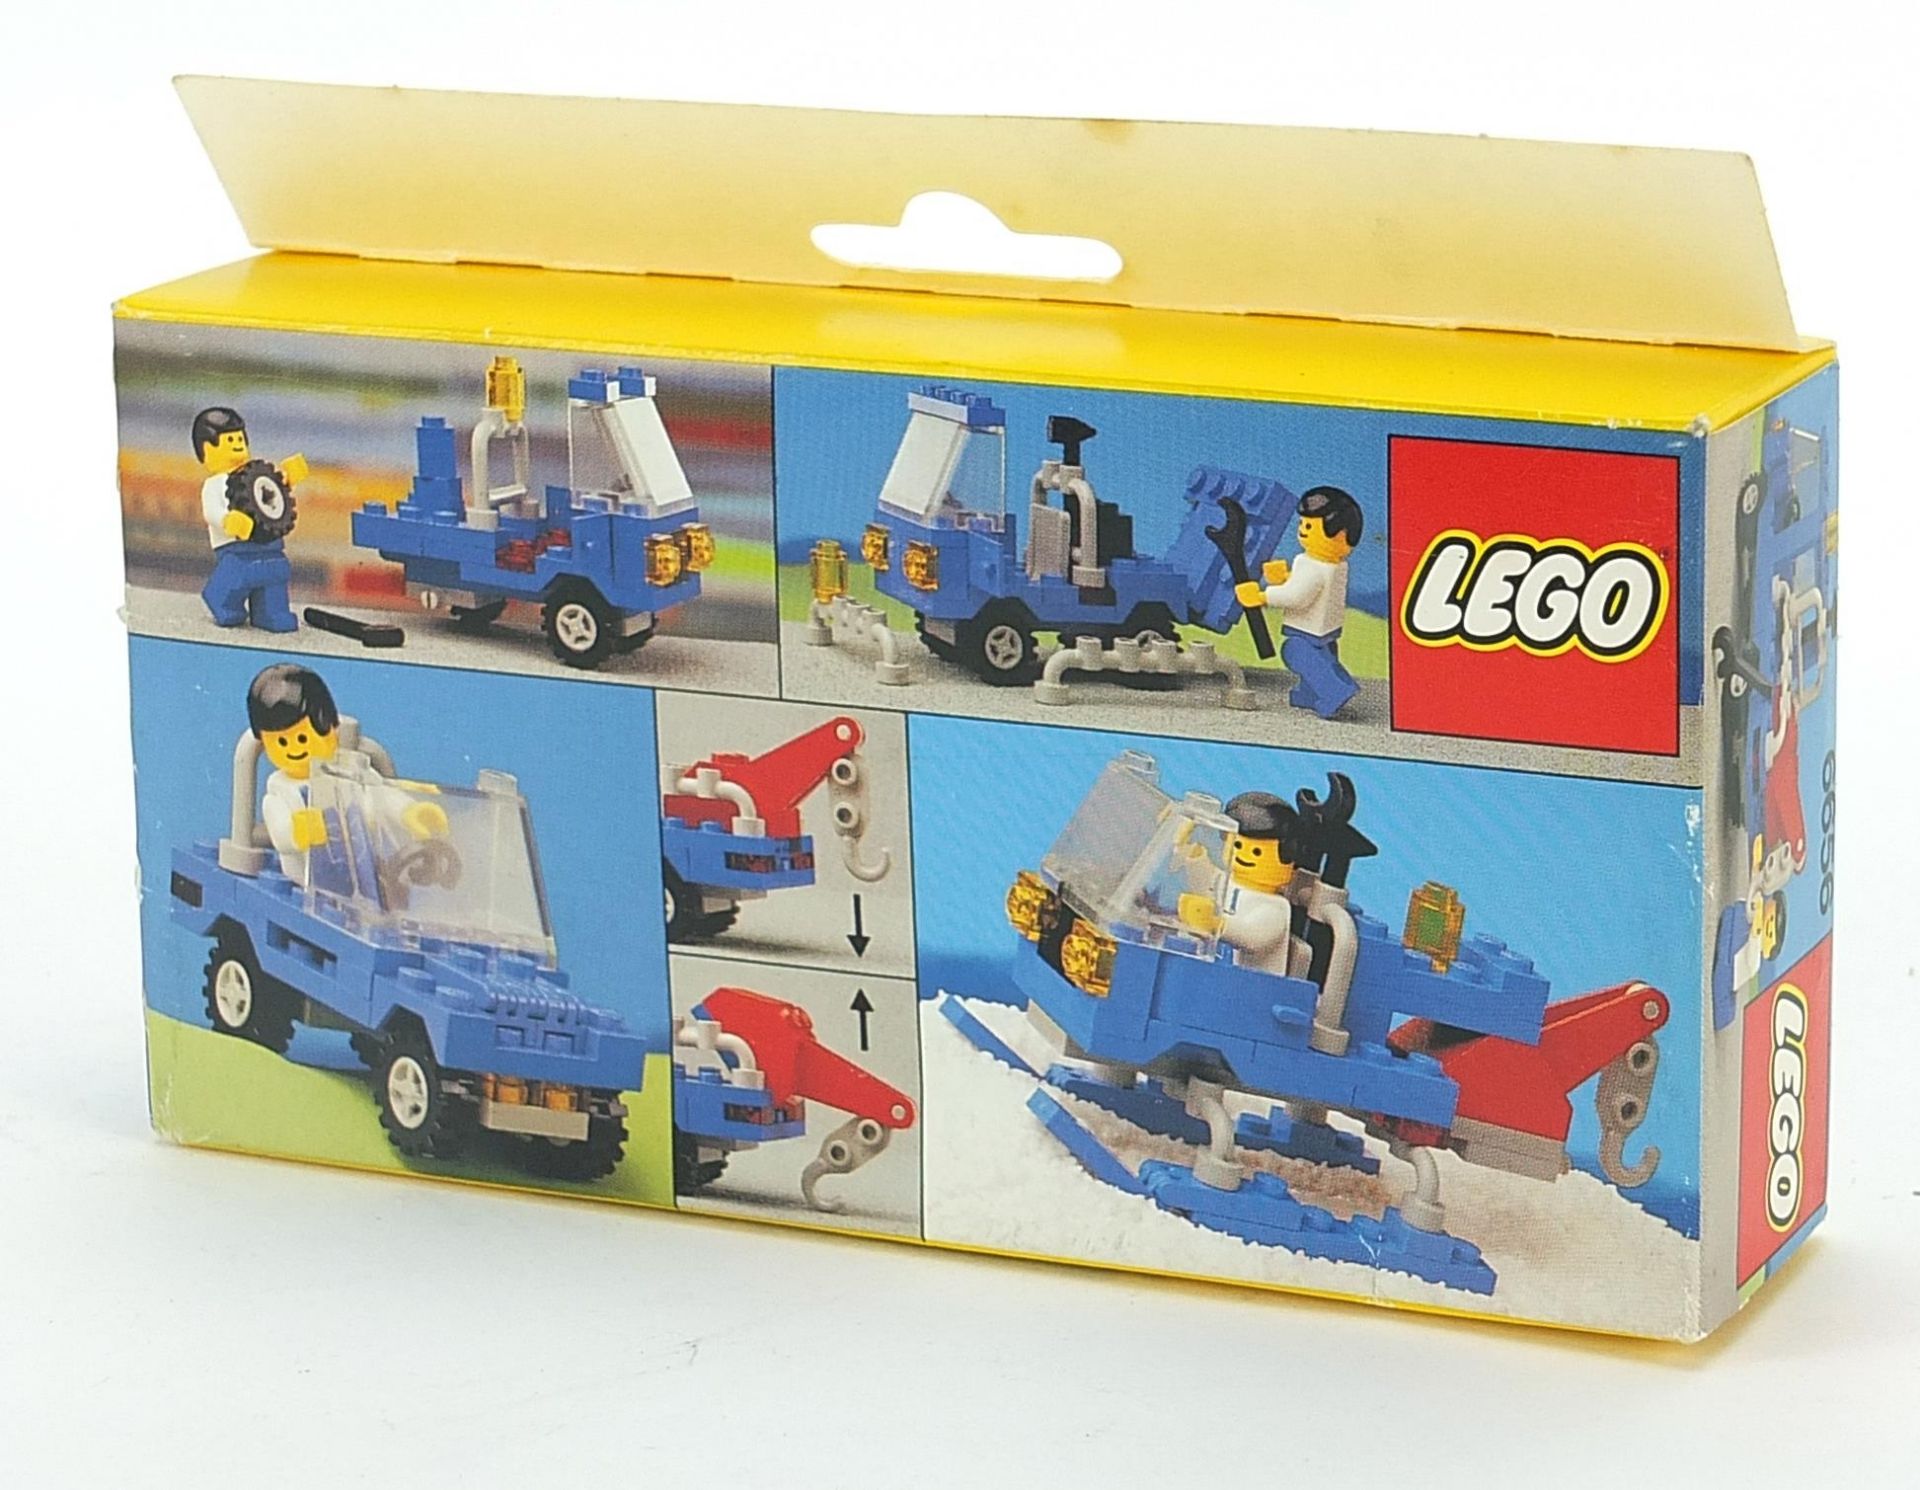 Vintage Lego break down truck with box, 6656 - Image 2 of 2